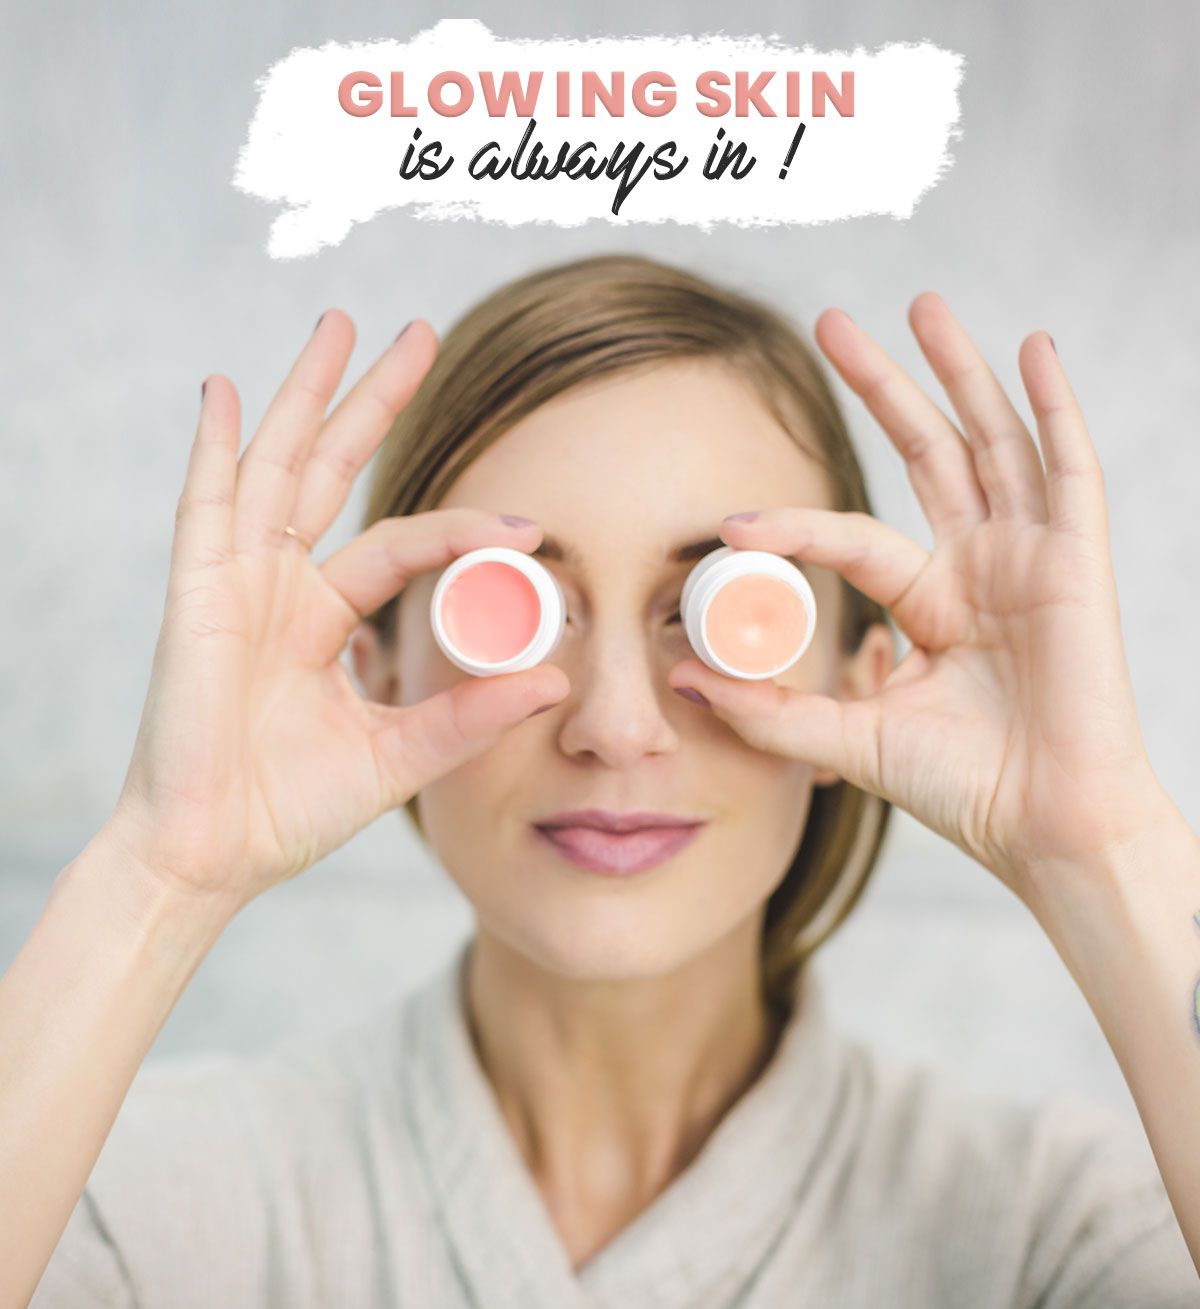 How to Get a Healthy, Glowing Skin Naturally? Quick Skincare Tips